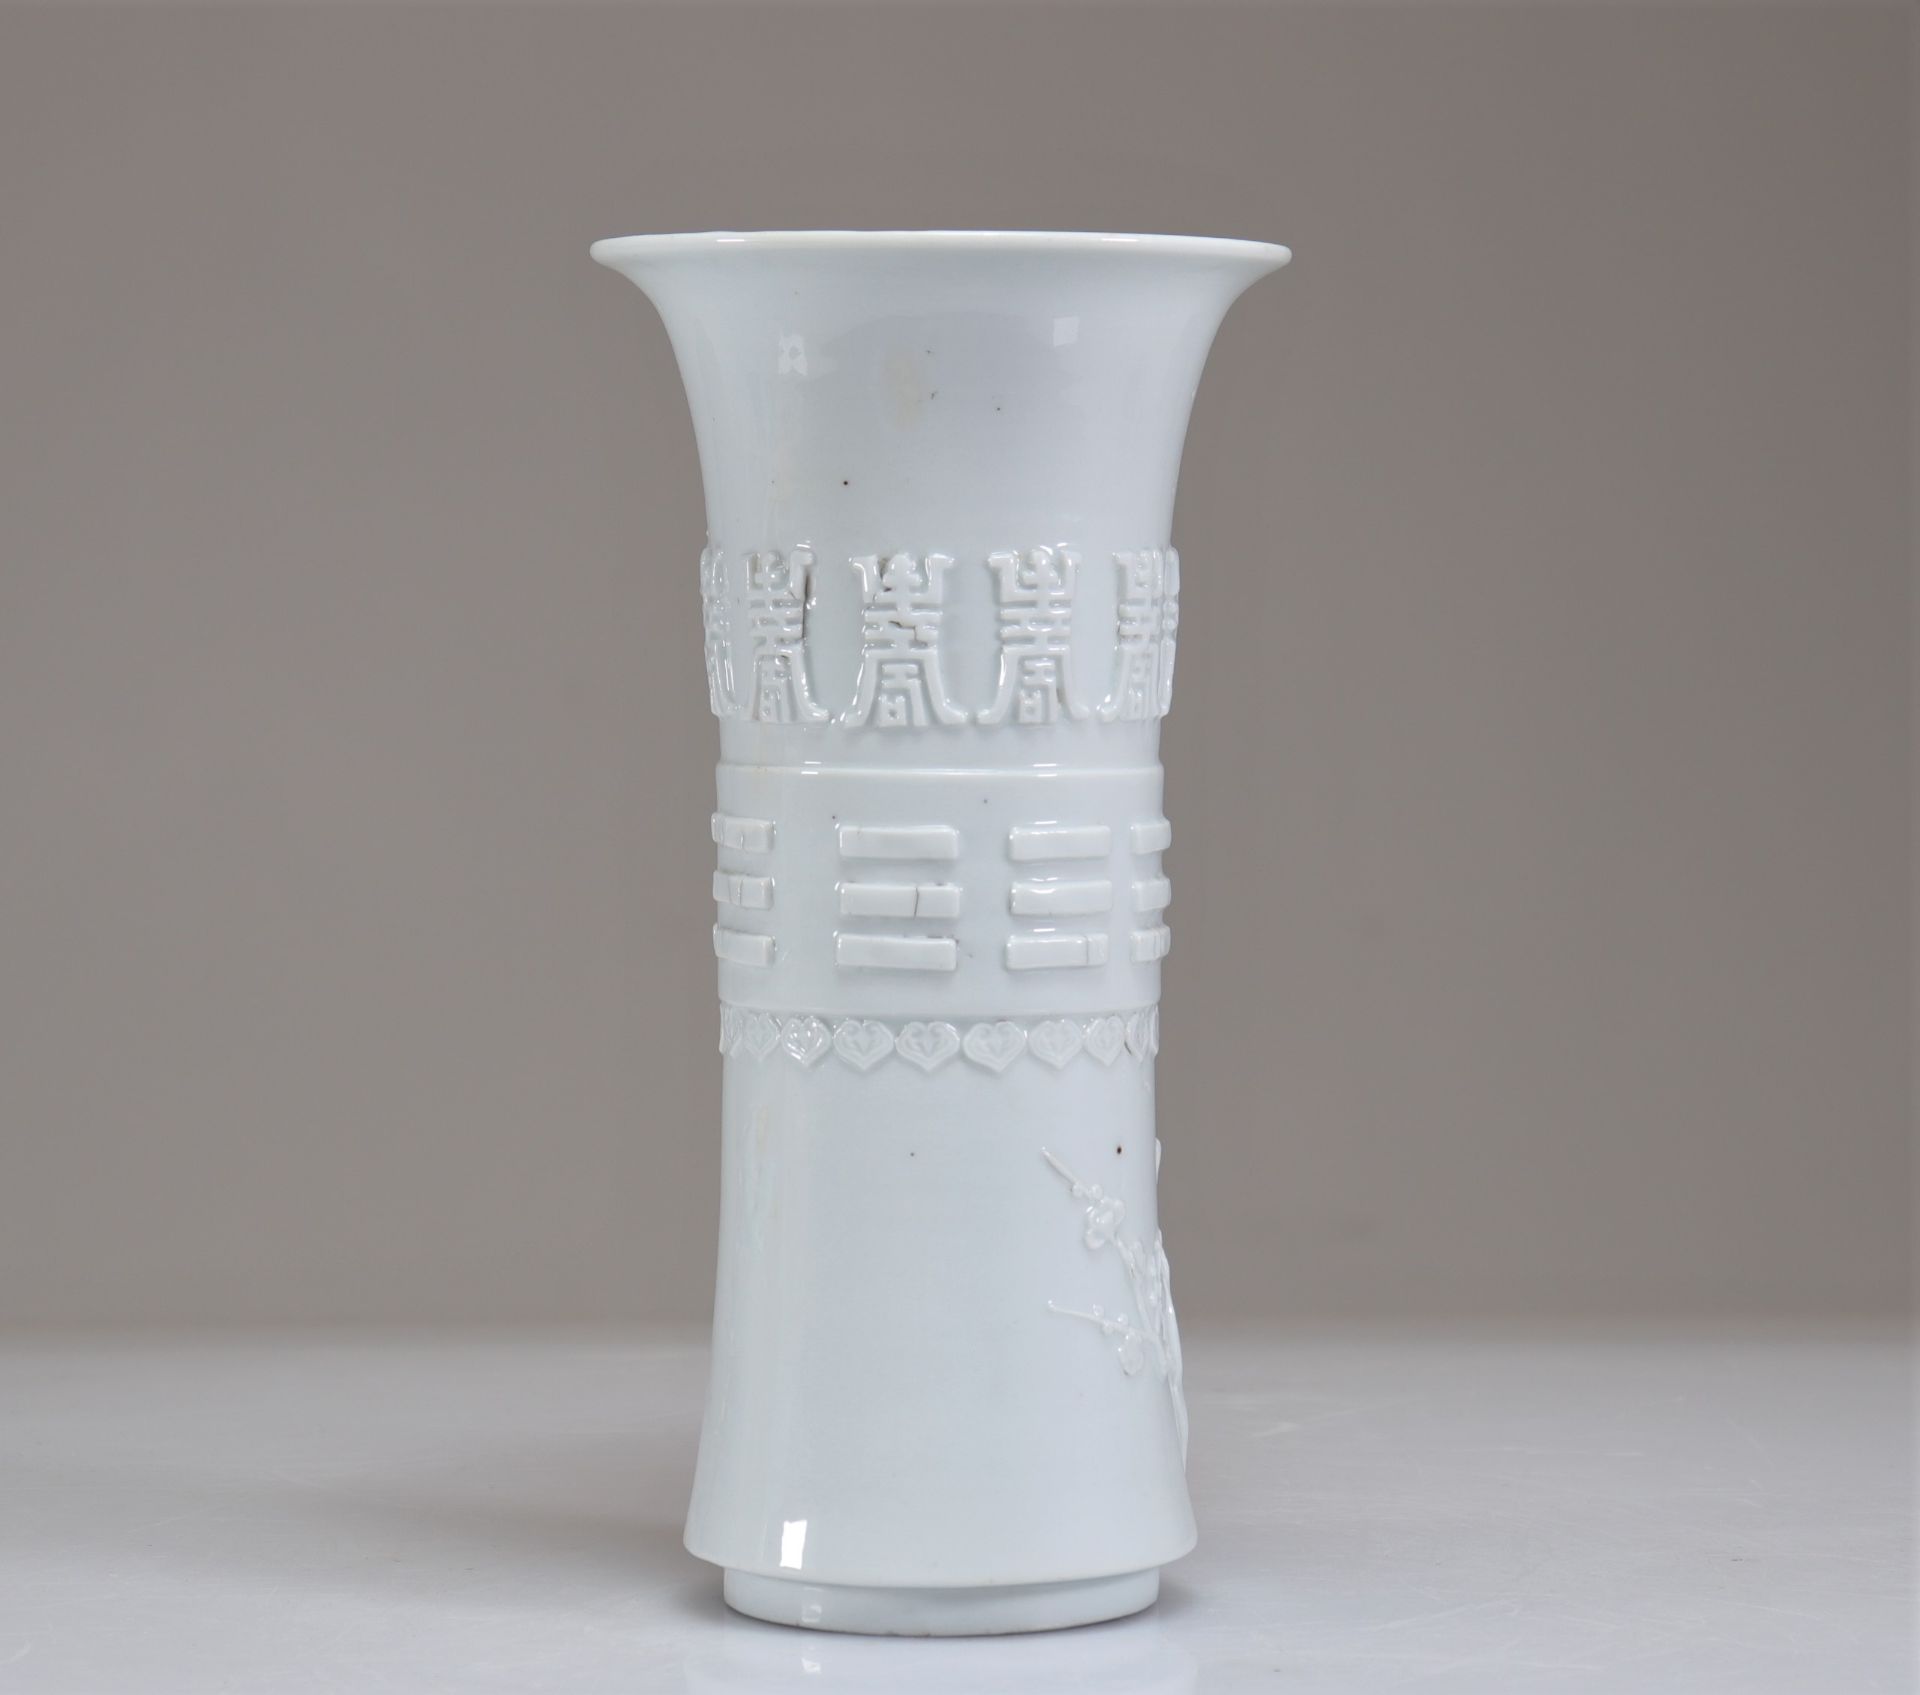 Rare white Gu-shaped vase decorated with characters from Qing period, 18th century - Bild 3 aus 5